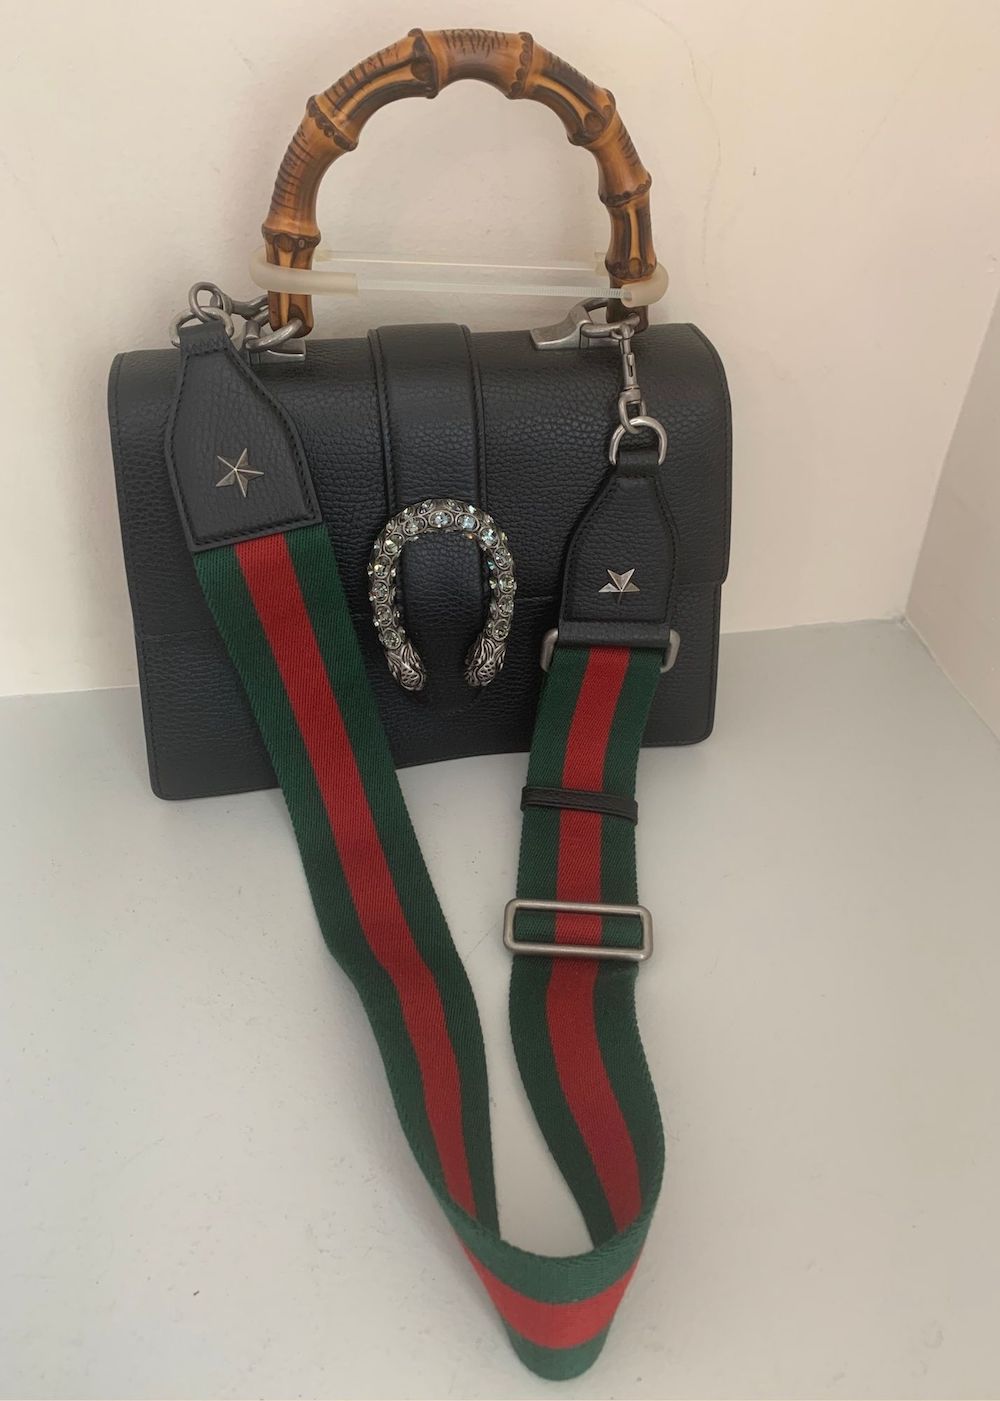 Gucci Navy, Green, And Red Calfskin Medium Dionysus Bamboo Top Handle Bag  Aged Gold Hardware Available For Immediate Sale At Sotheby's